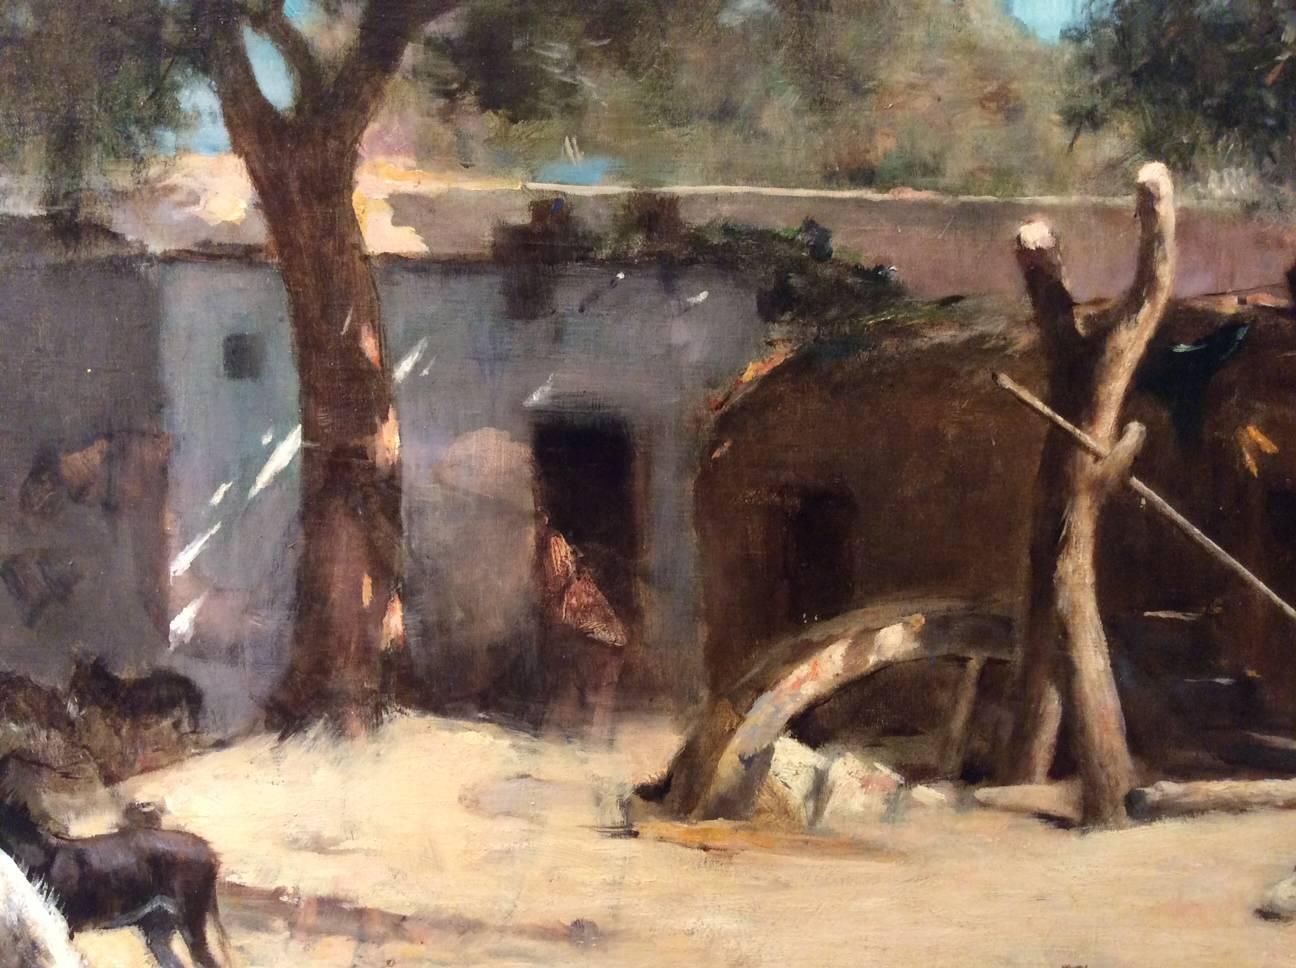 Village in Egypt, Large Painting Signed Maxime Dastugue (1851-1909) 1